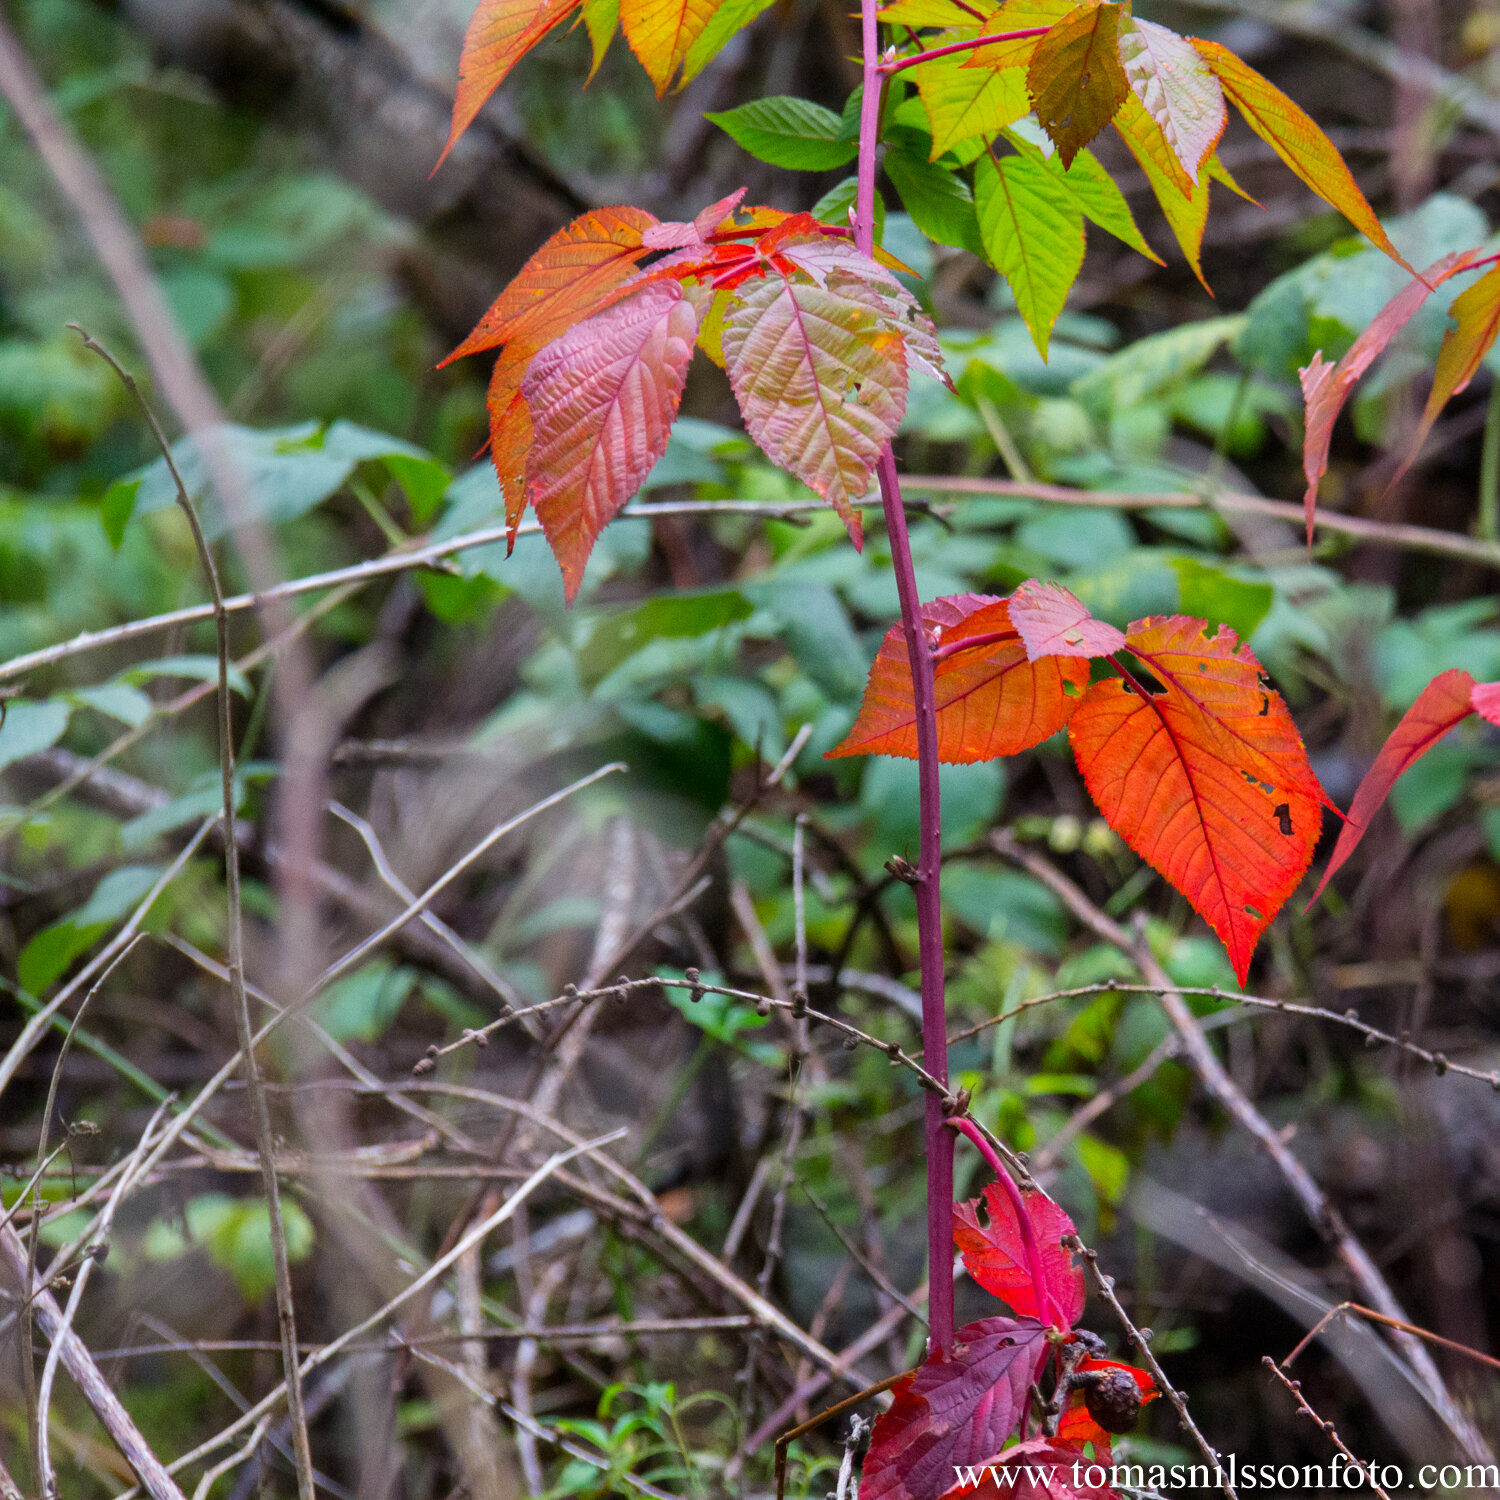 Day 281 - October 8: Leaves